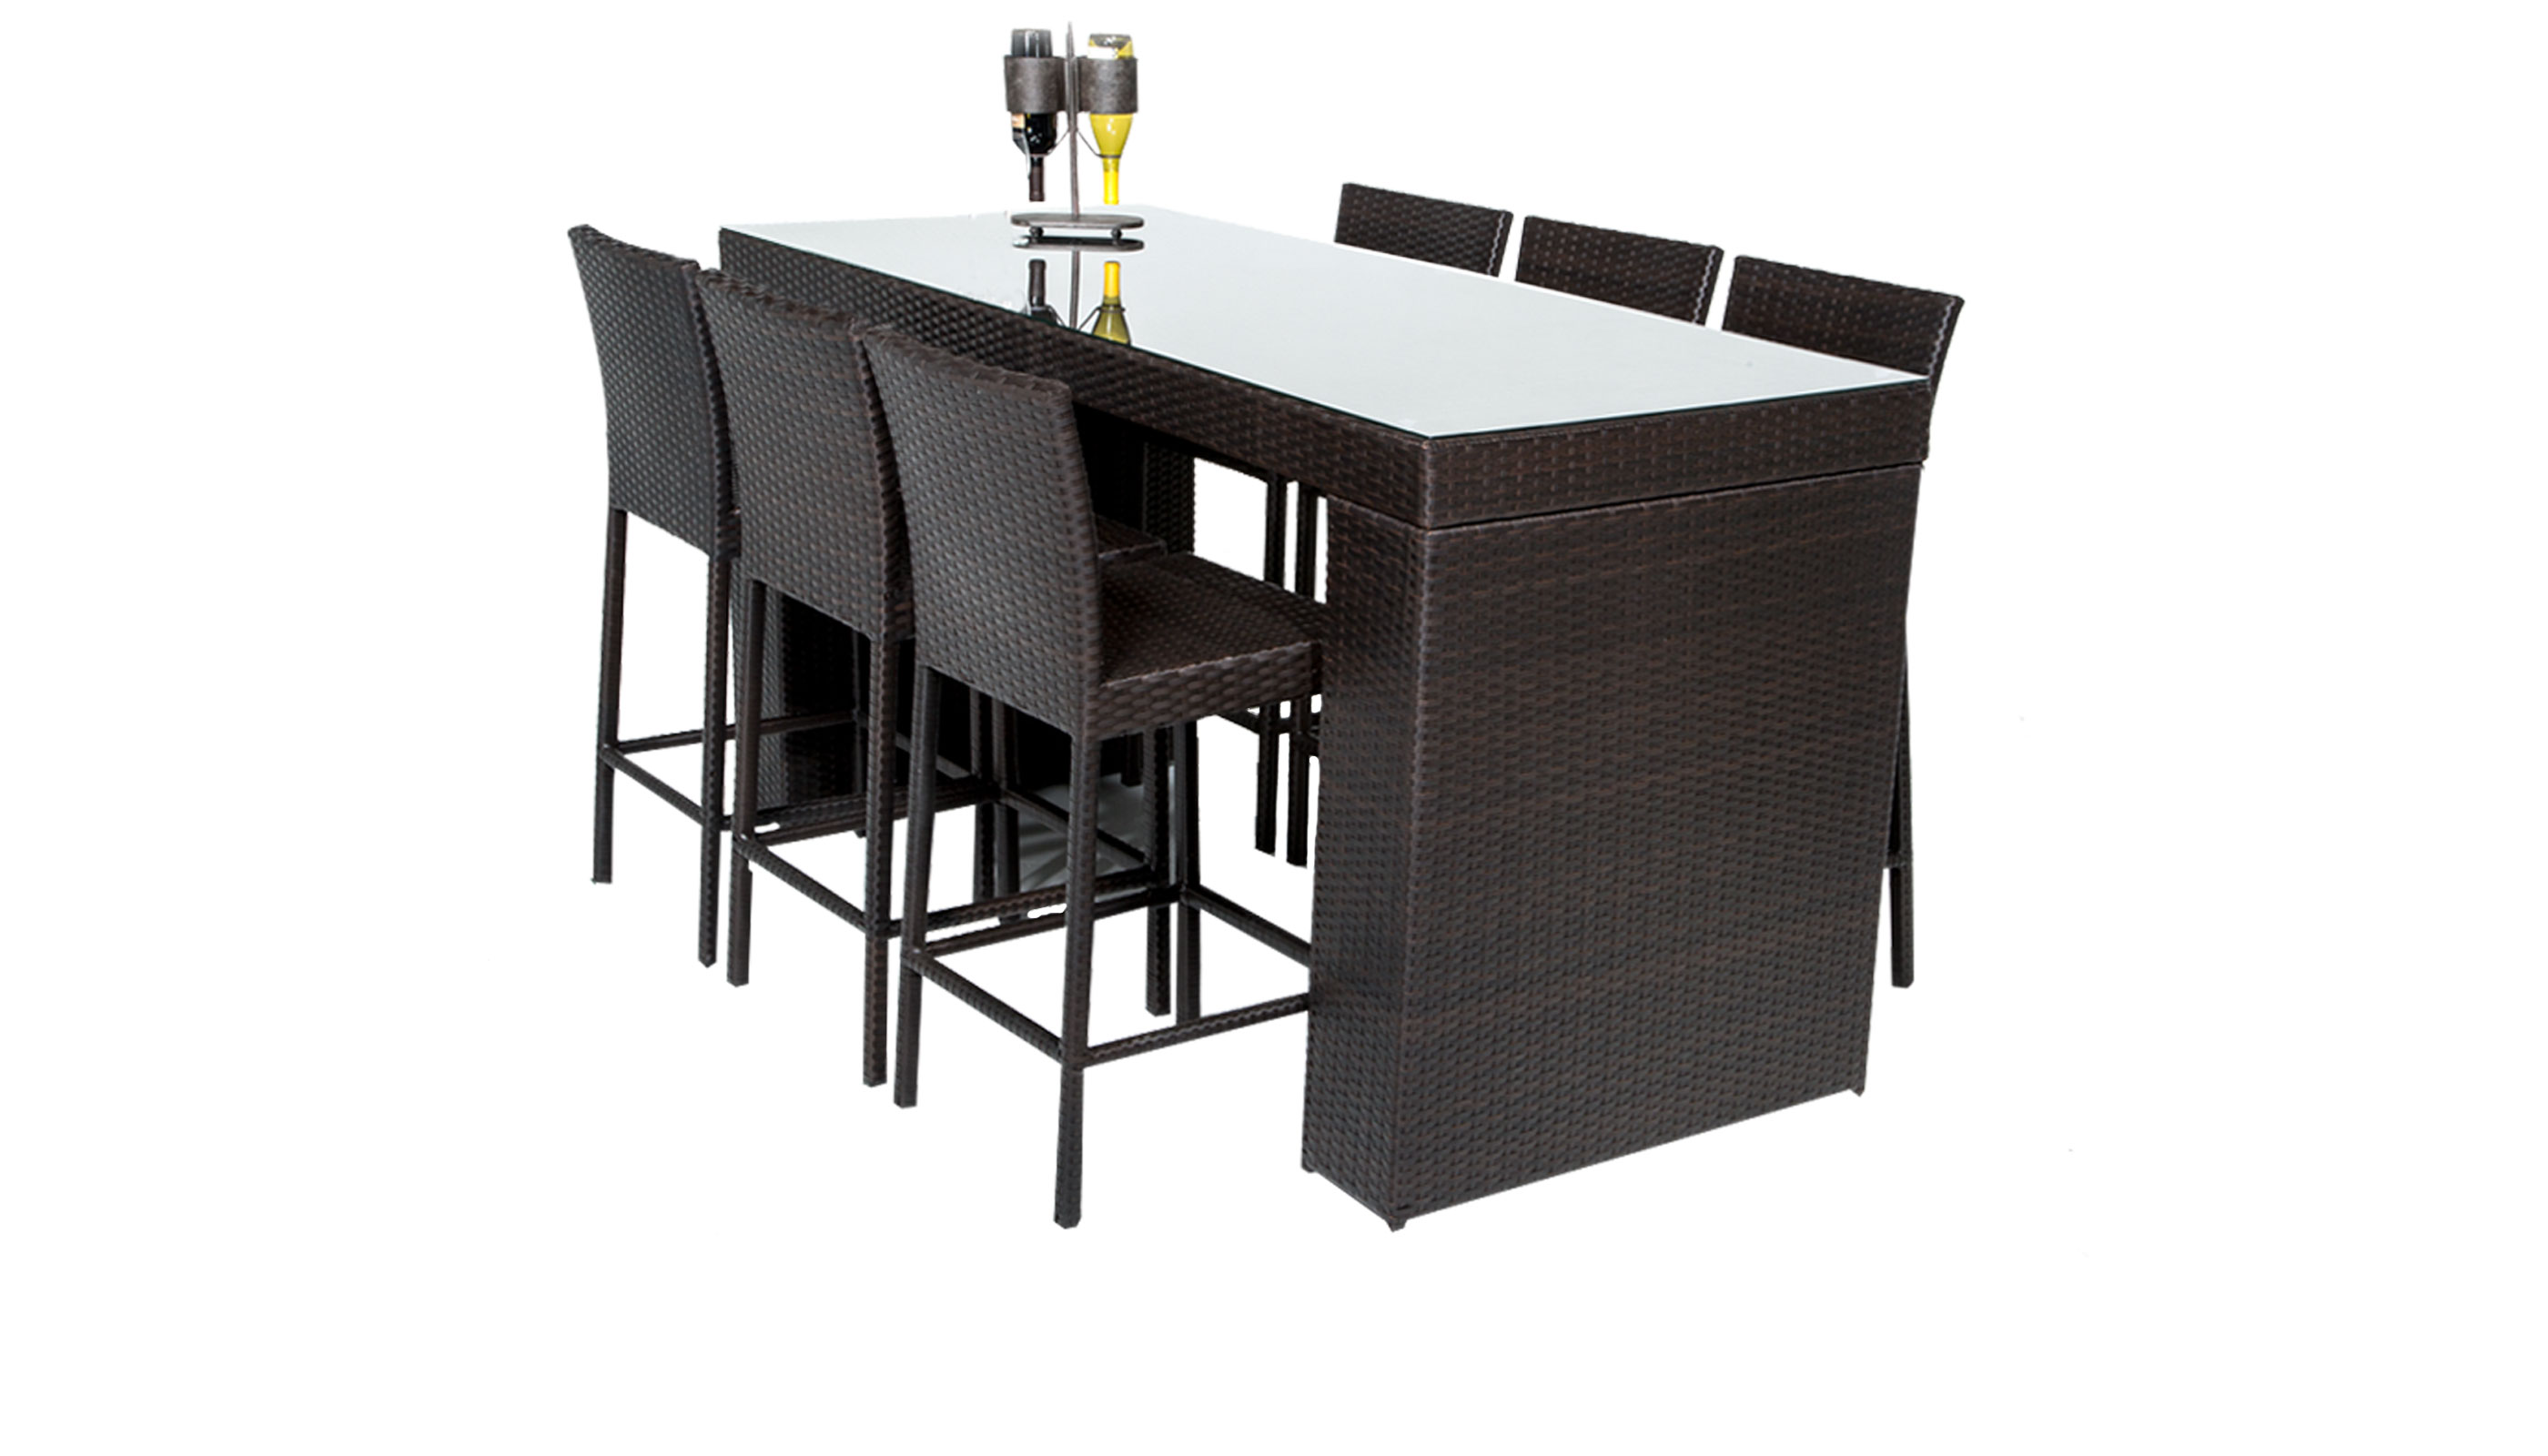 Barbados Bar Table Set With Barstools 7 Piece Outdoor Wicker Patio Furniture - TK Classics